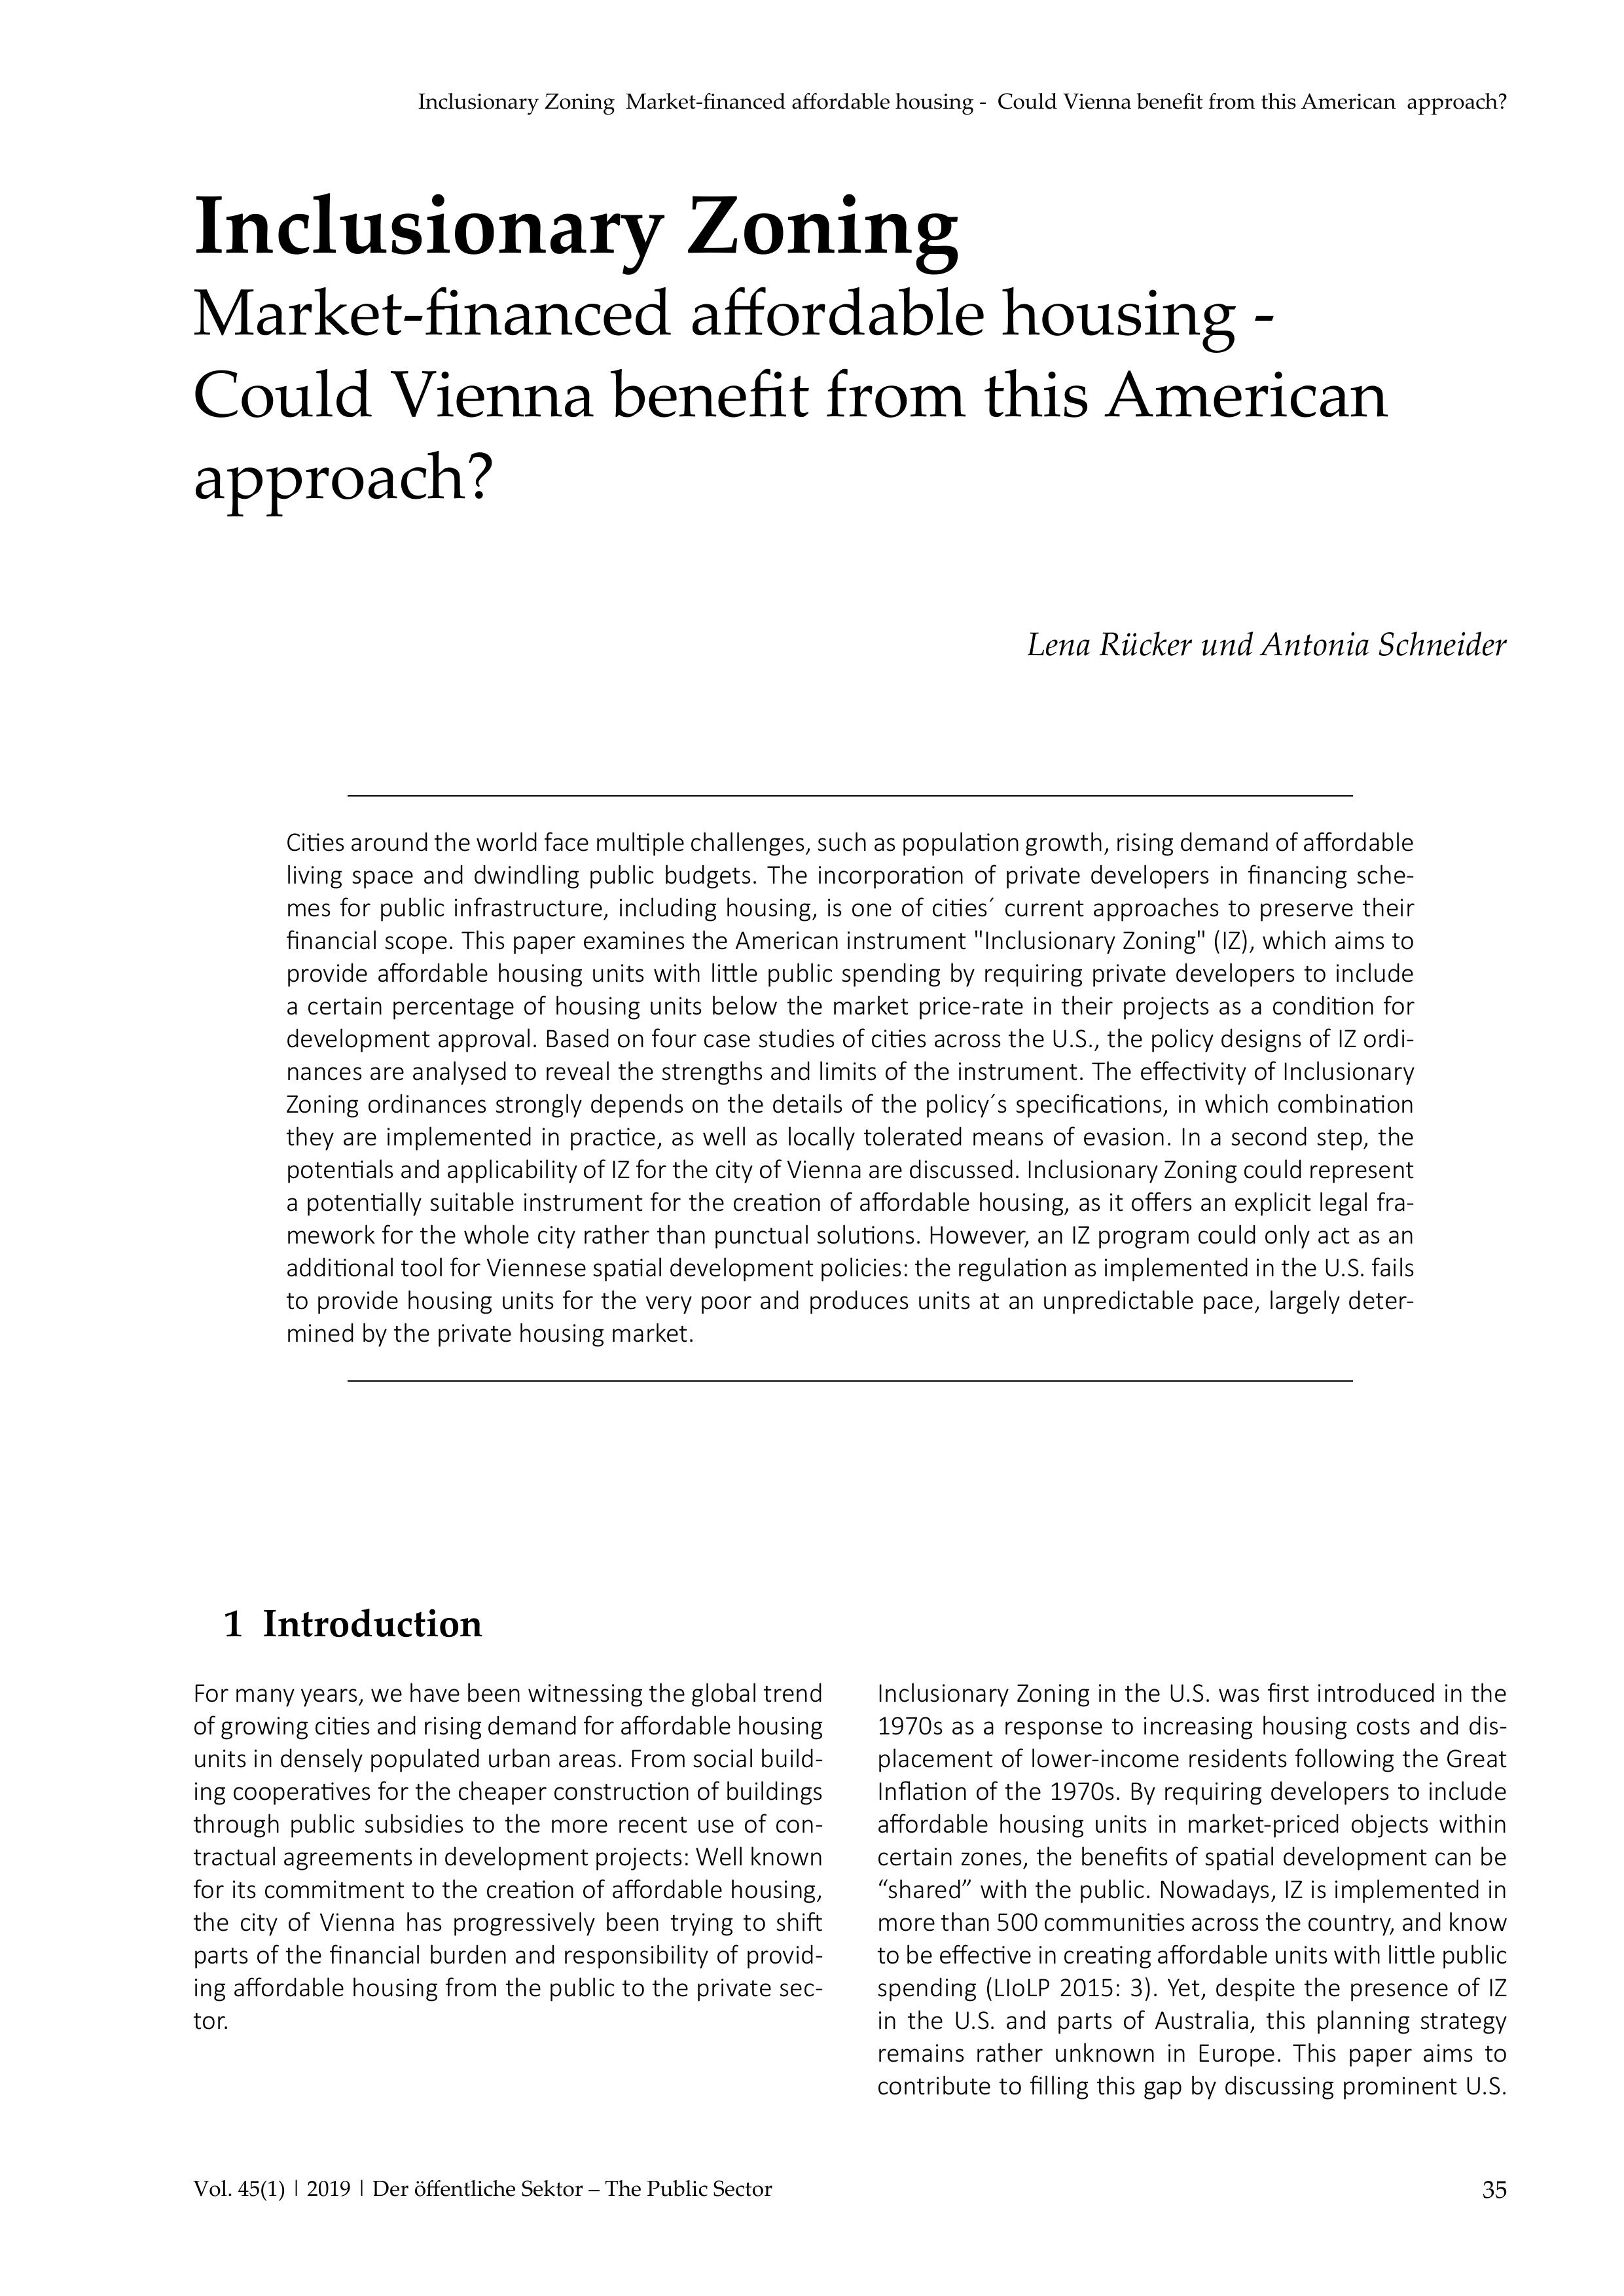 Inclusionary Zoning. Market-financed affordable housing - Could Vienna benefit from this American approach?